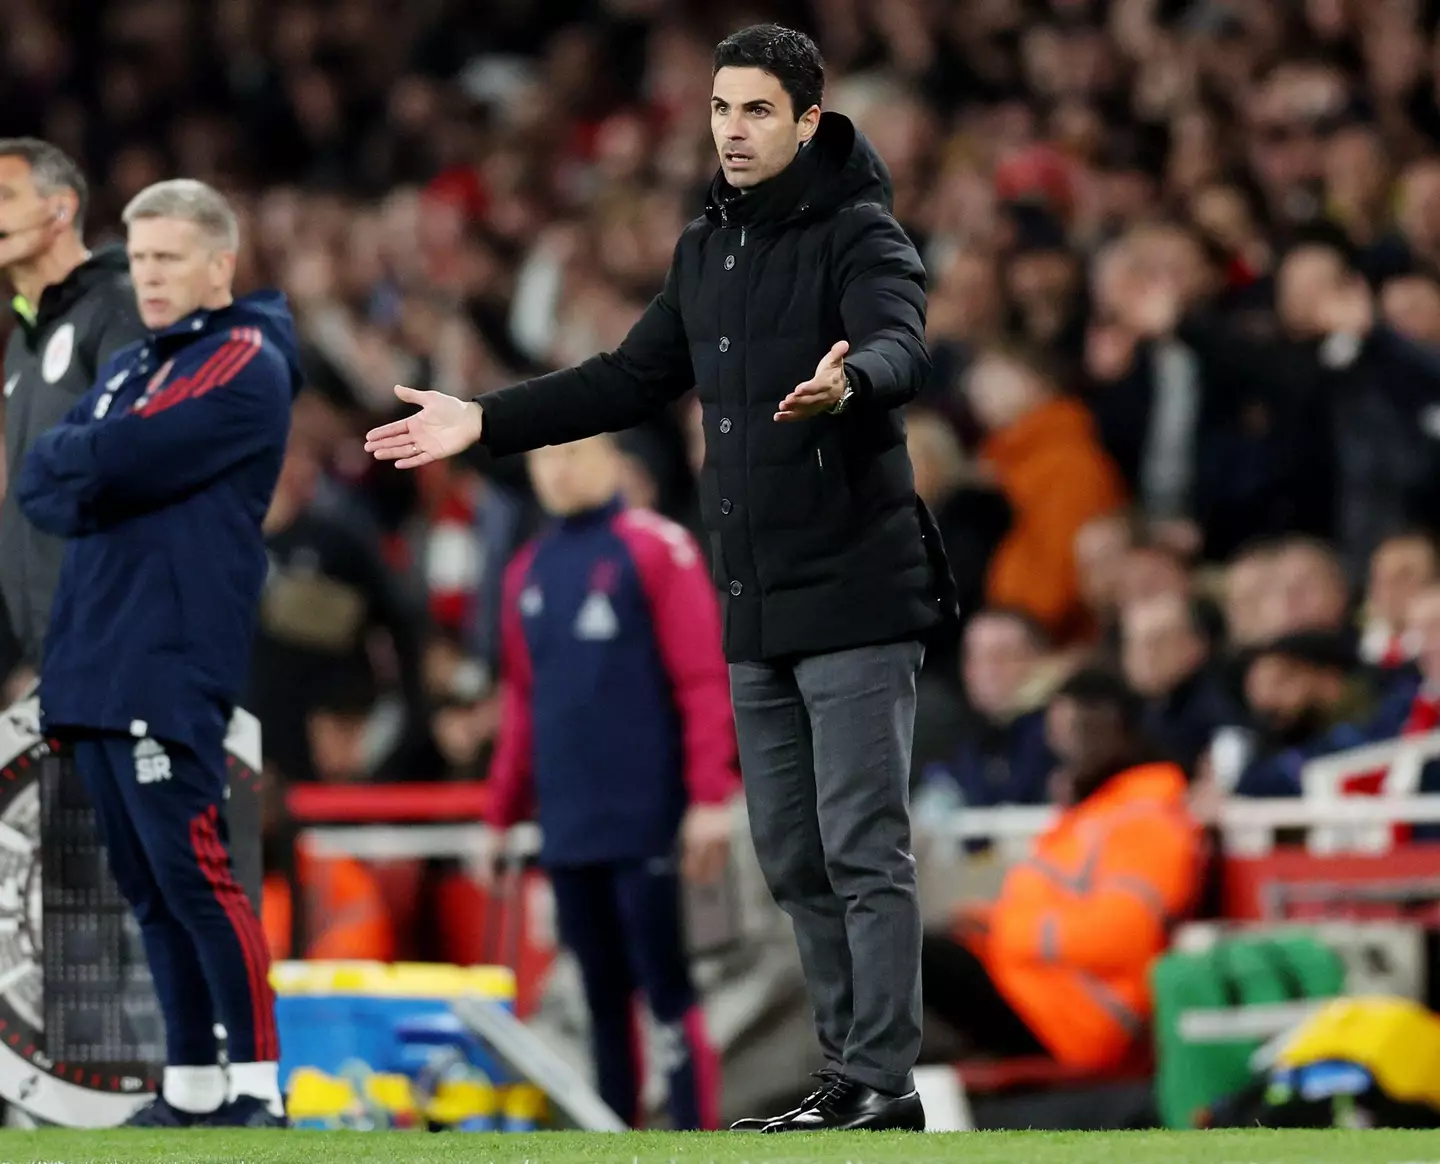 Mikel Arteta cuts a frustrated figure on the touchline during Arsenal vs. Southampton. Image: Alamy